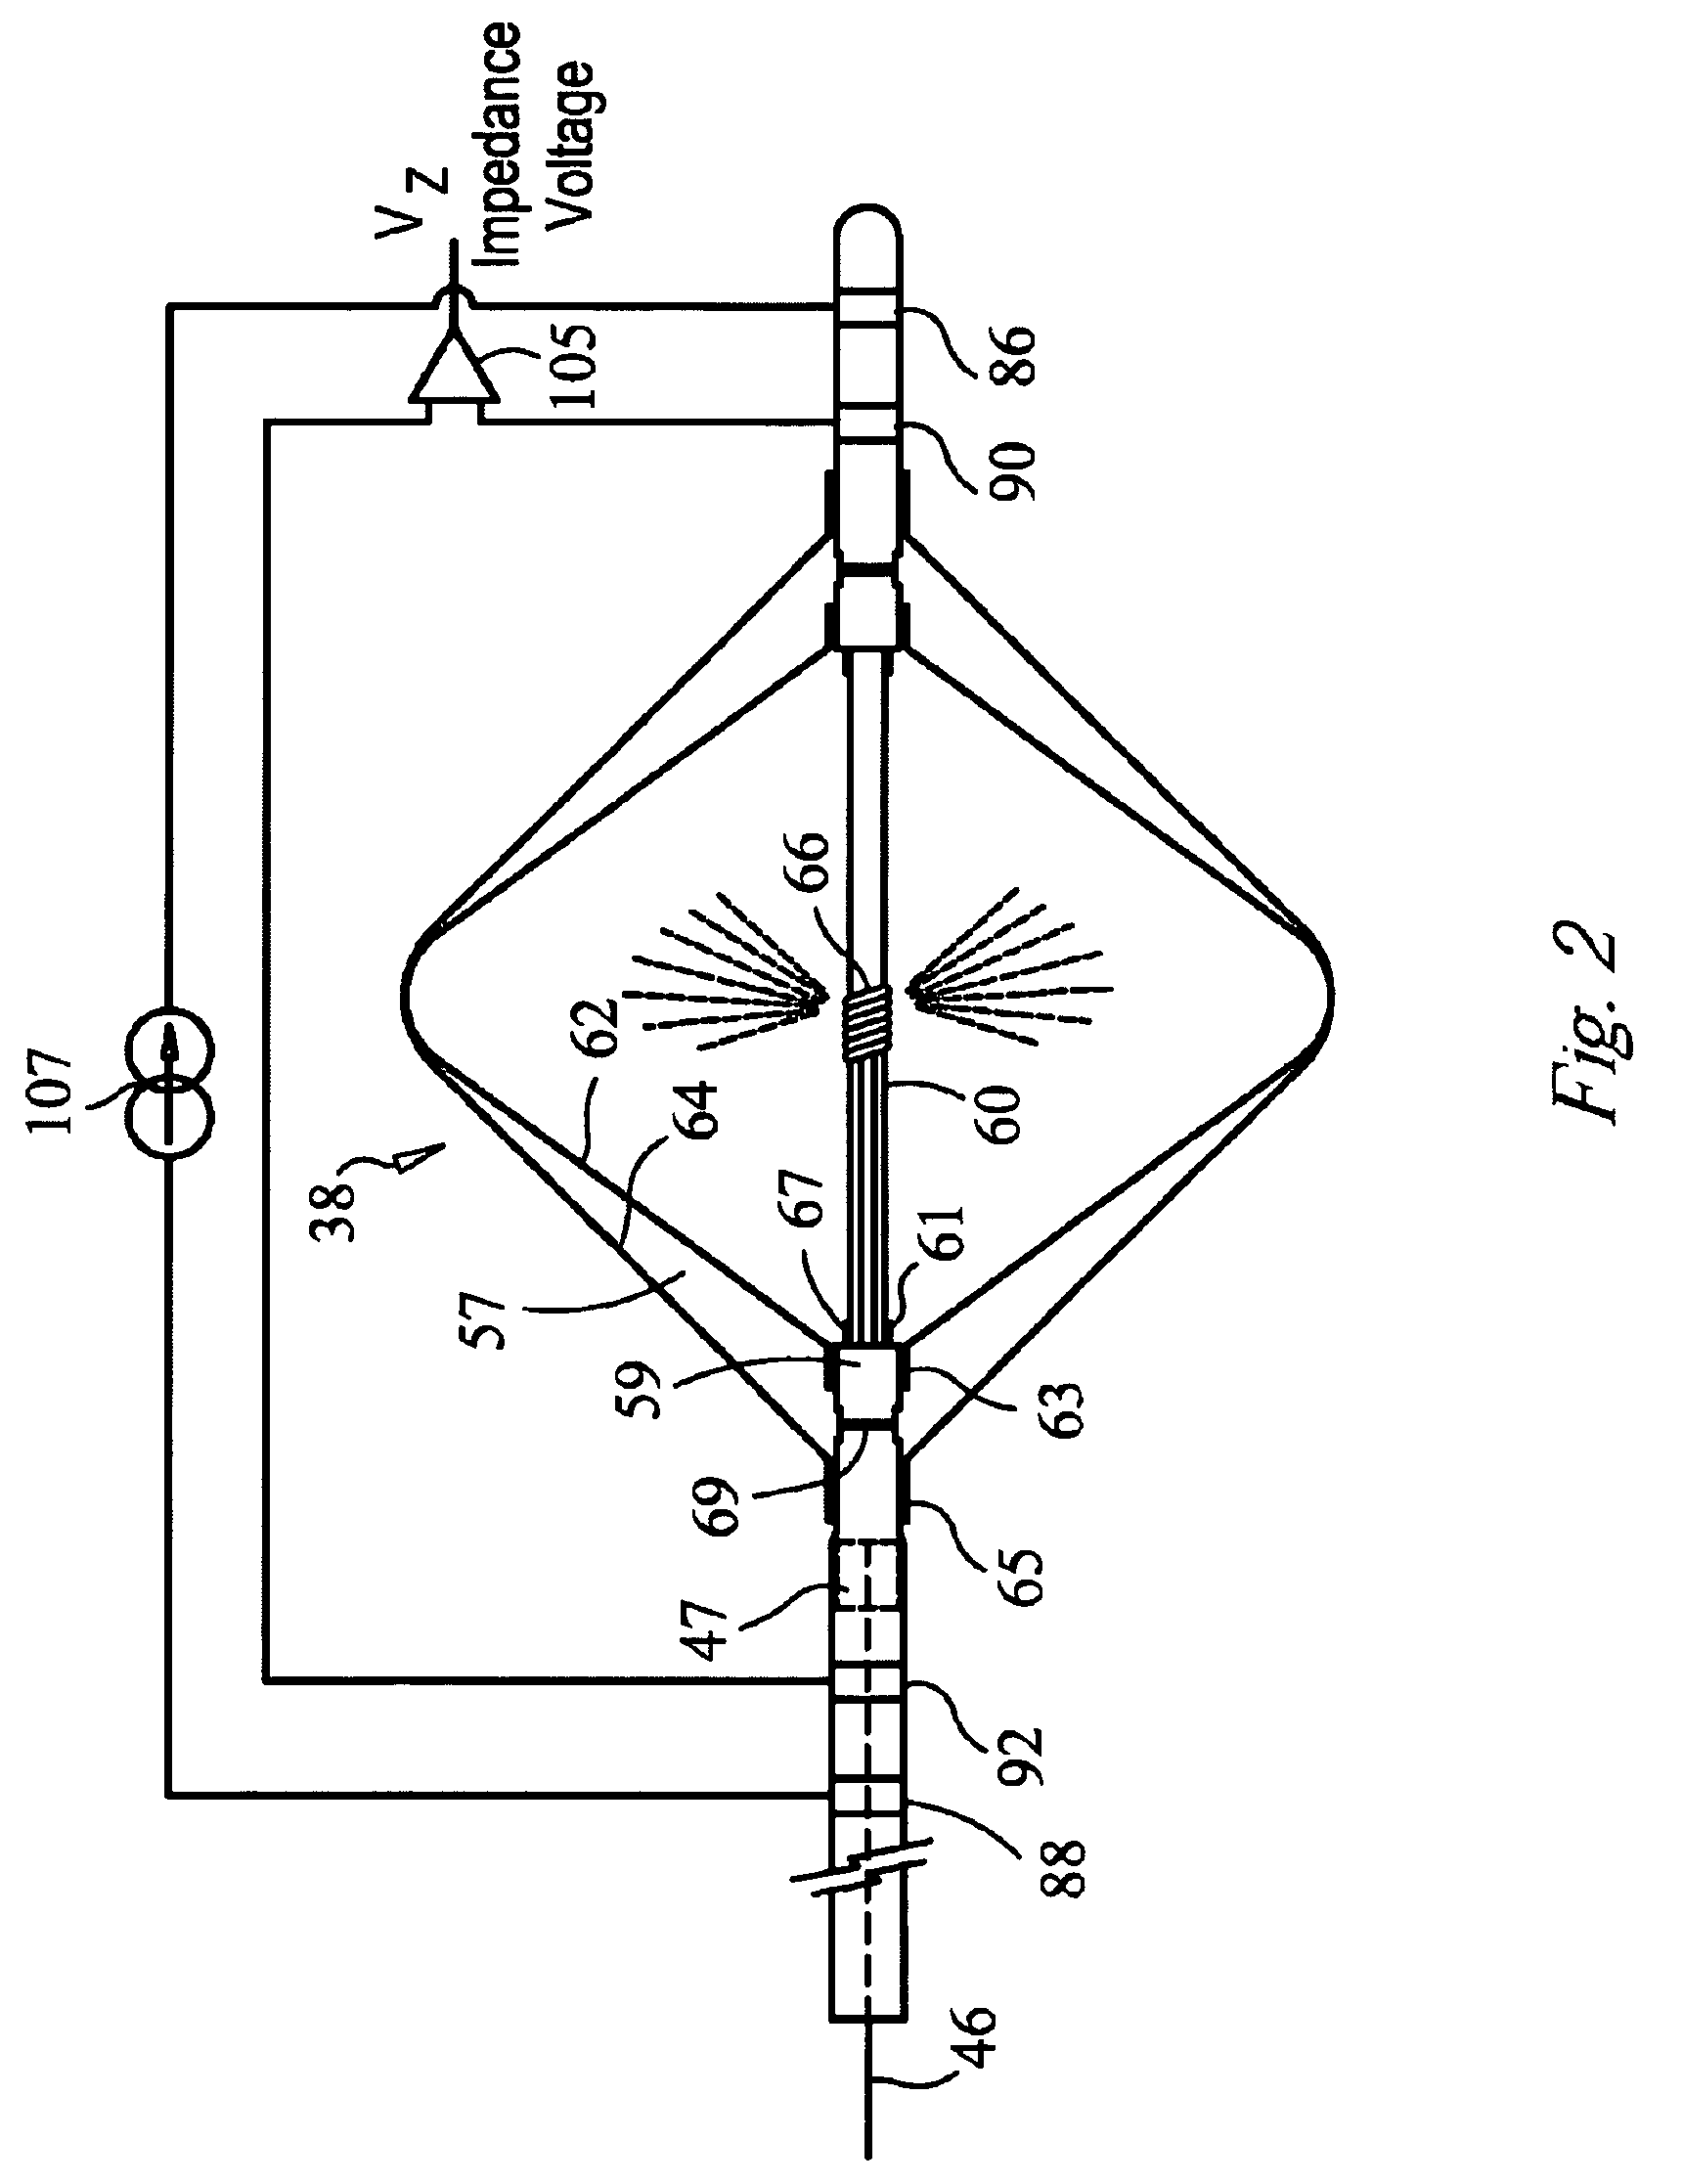 System and method for monitoring bioimpedance and respiration